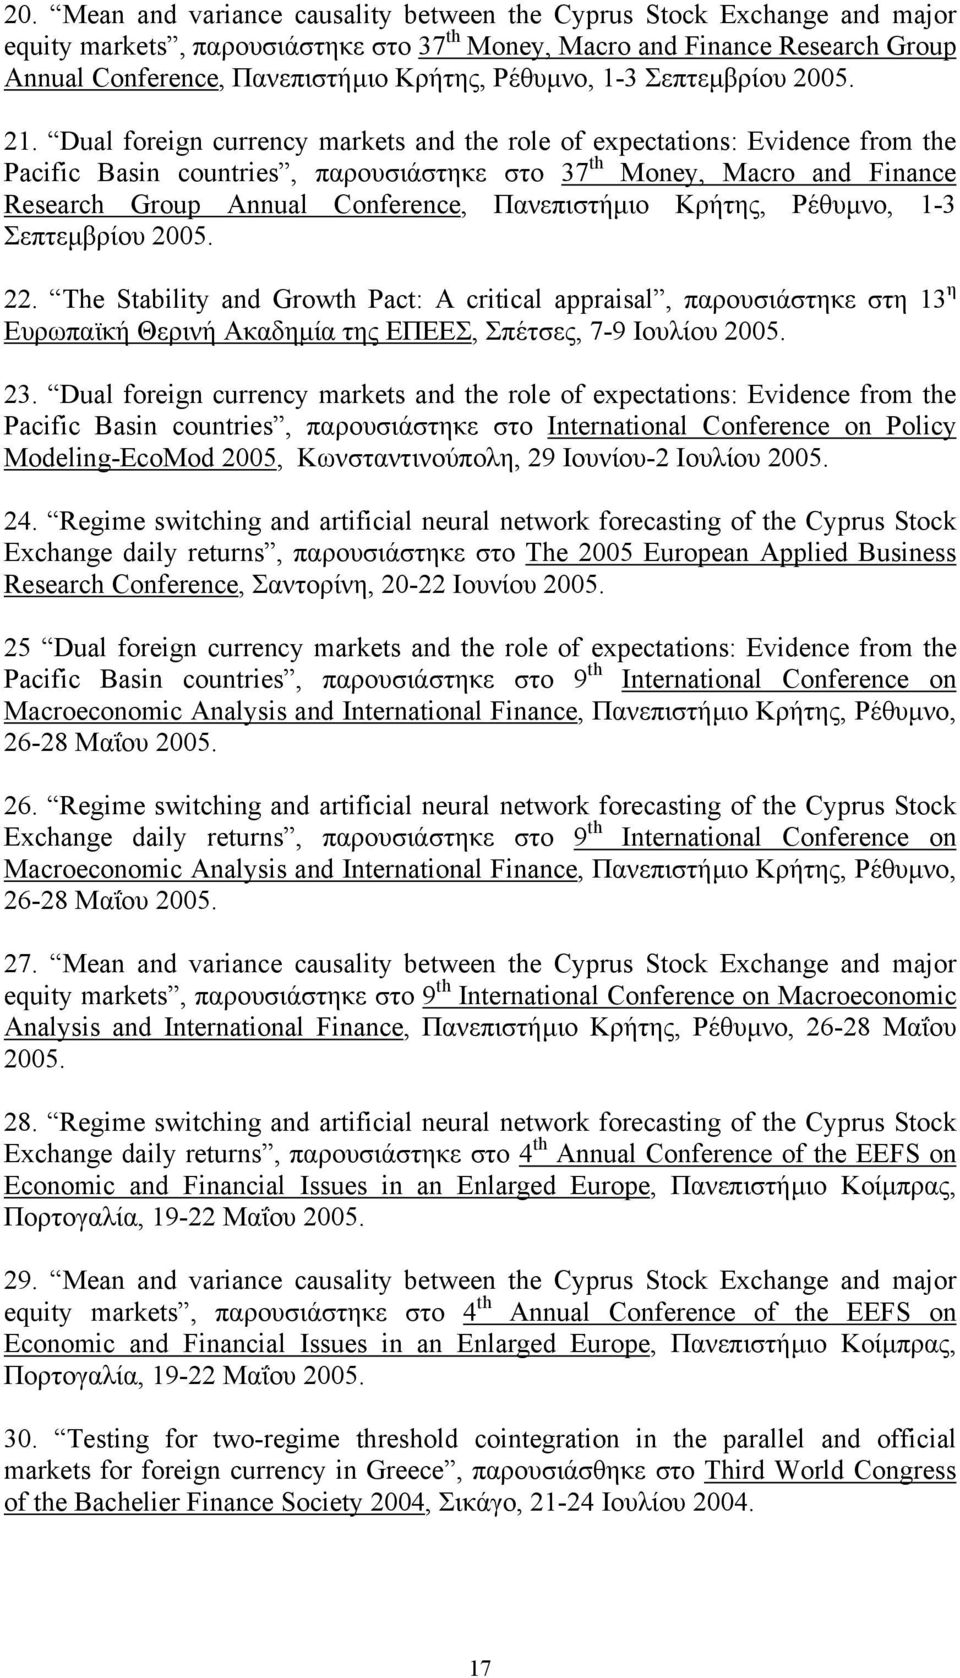 Dual foreign currency markets and the role of expectations: Evidence from the Pacific Basin countries, παρουσιάστηκε στο 37 th Money, Macro and Finance Research Group Annual Conference, Πανεπιστήµιο